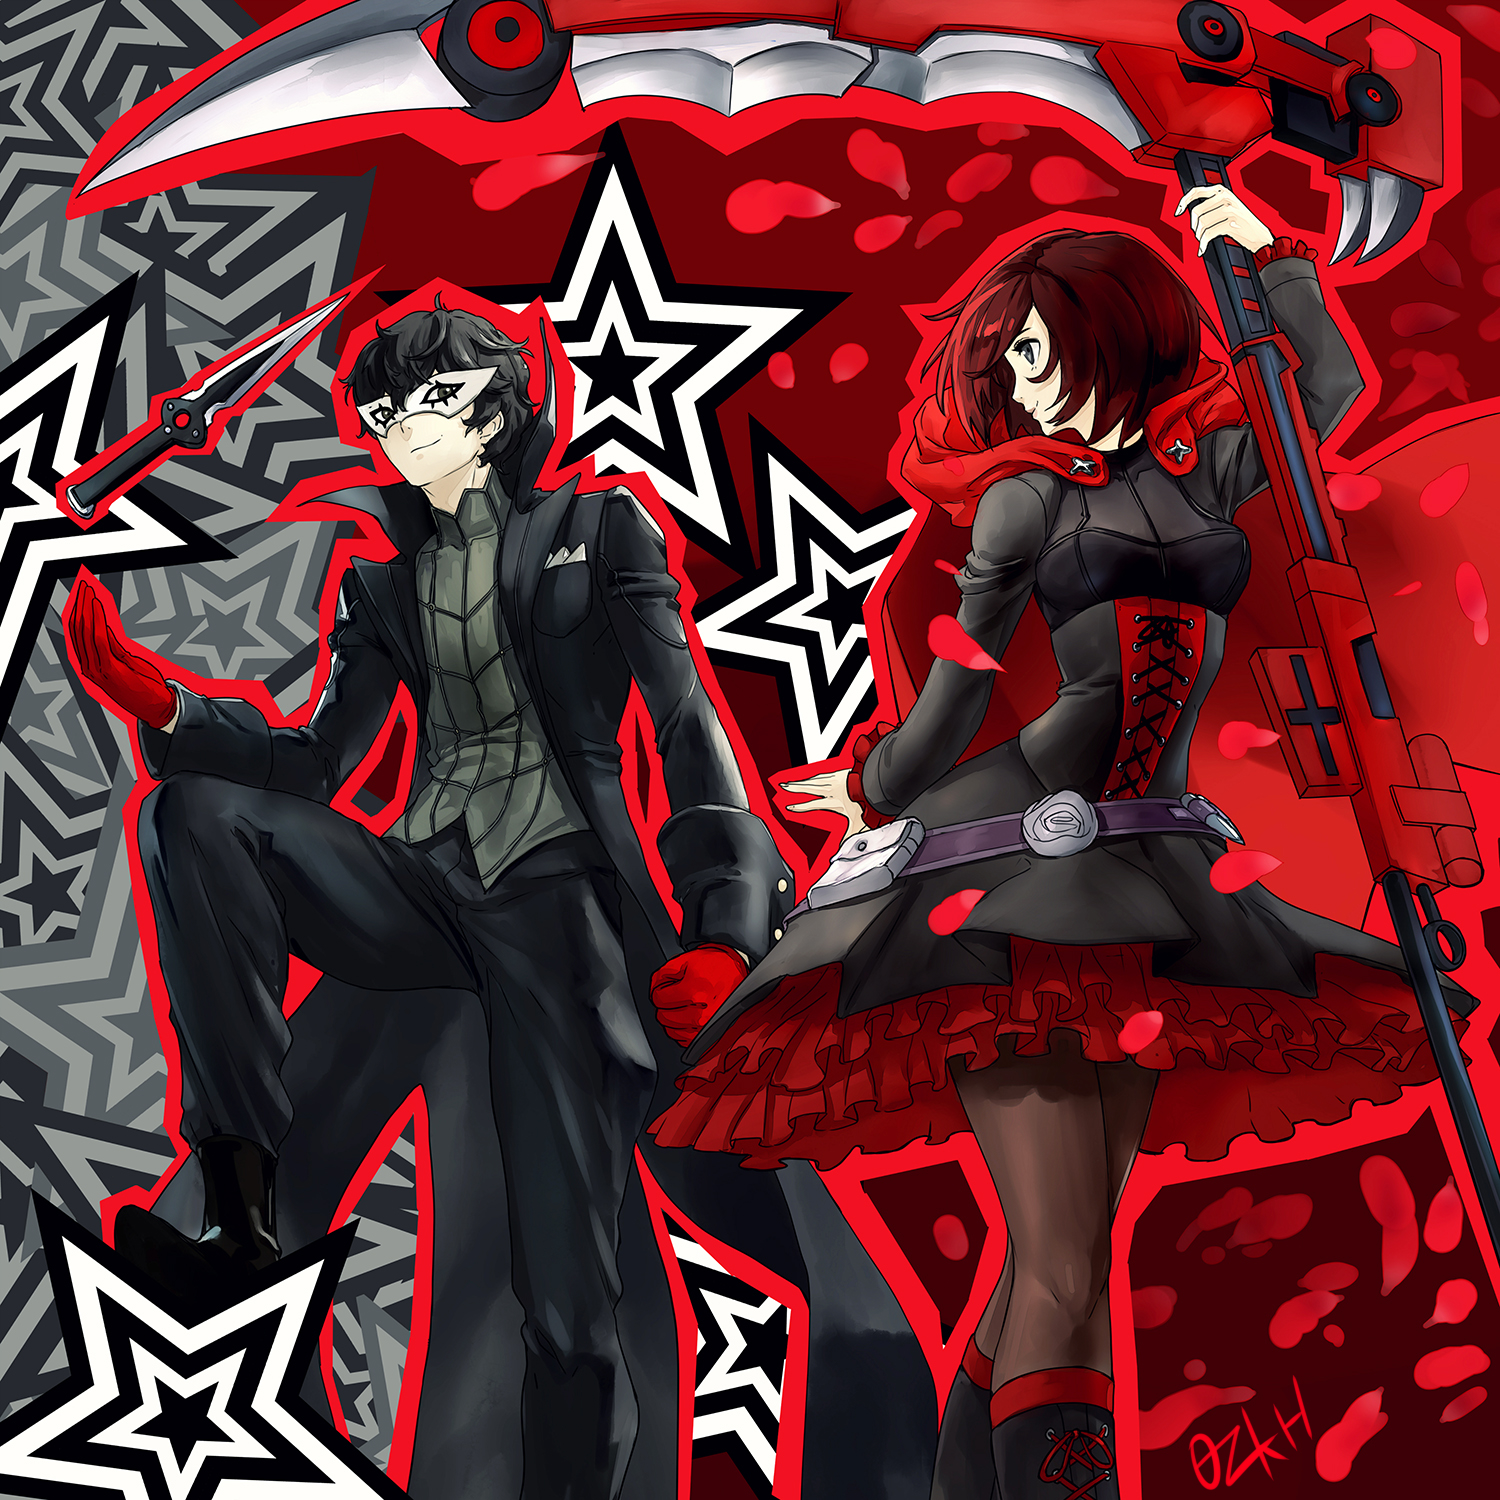 “Joker from Persona 5 and Ruby Rose from RWBY. 